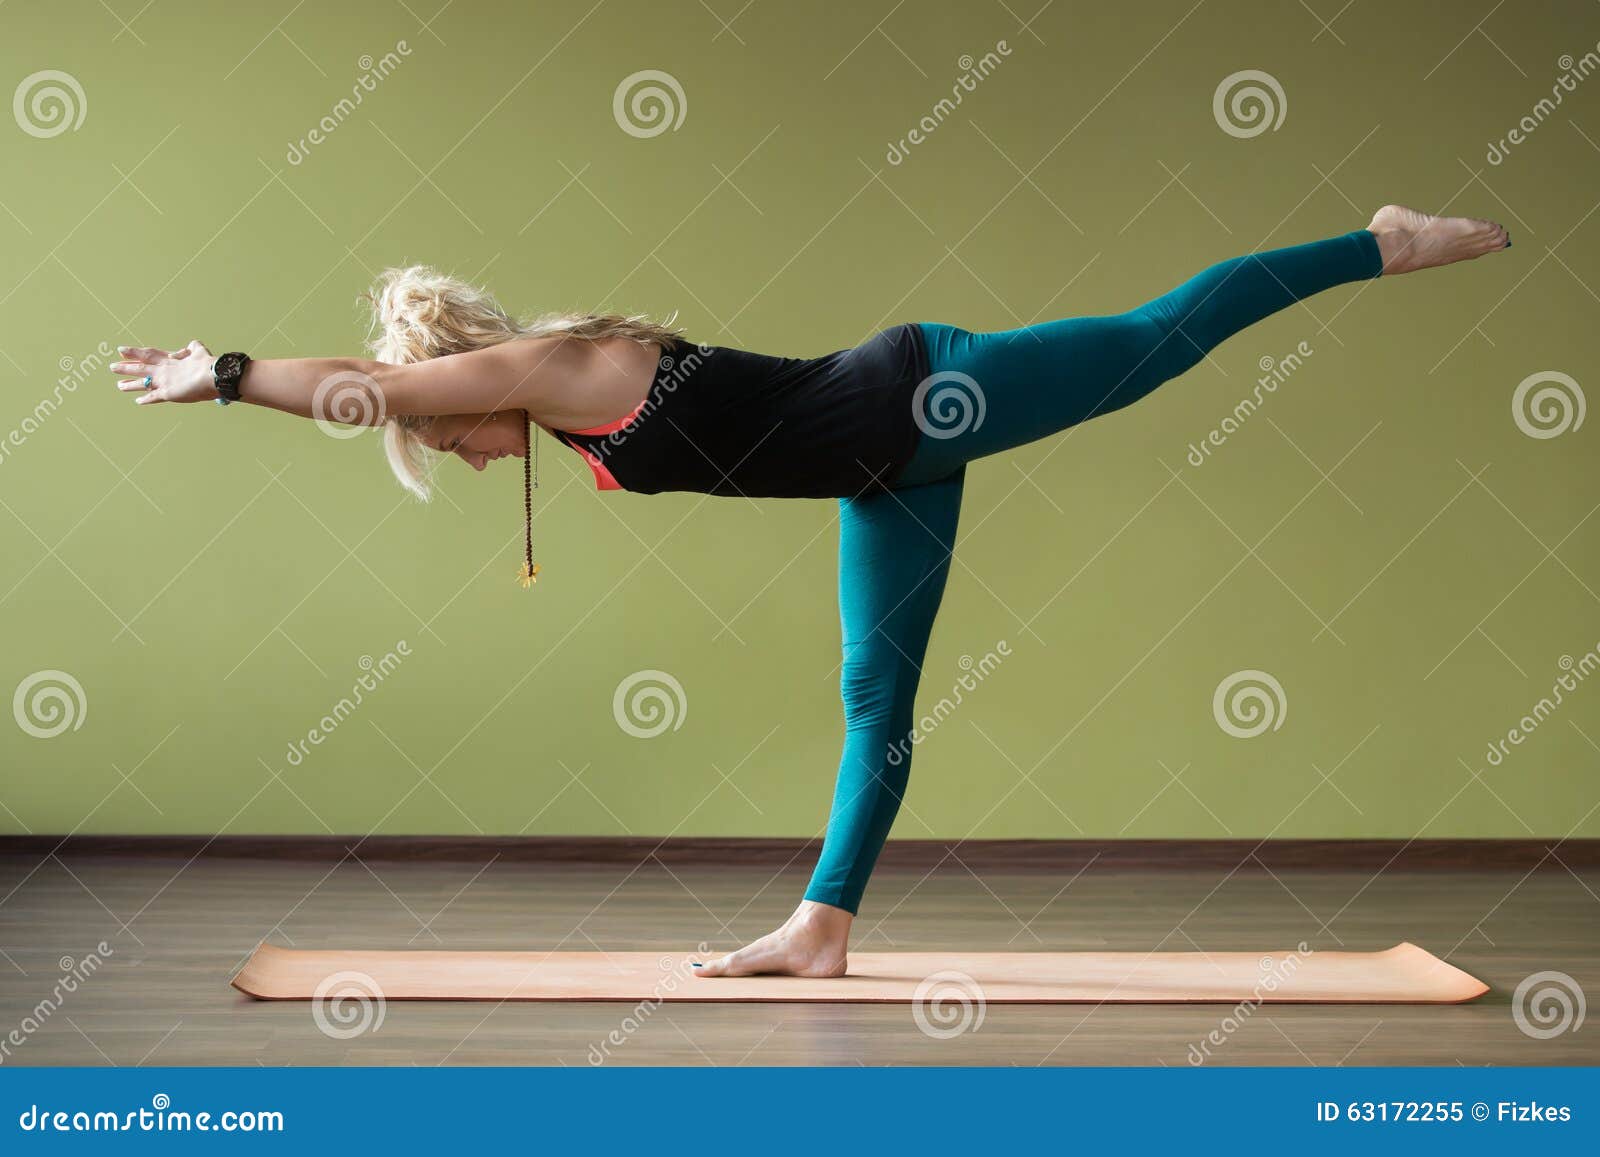 Balancing Stick Pose. Tuladandasana. Side View Of Woman Silhouette Doing  Yoga Outdoor At Morning Stock Photo, Picture and Royalty Free Image. Image  190680518.